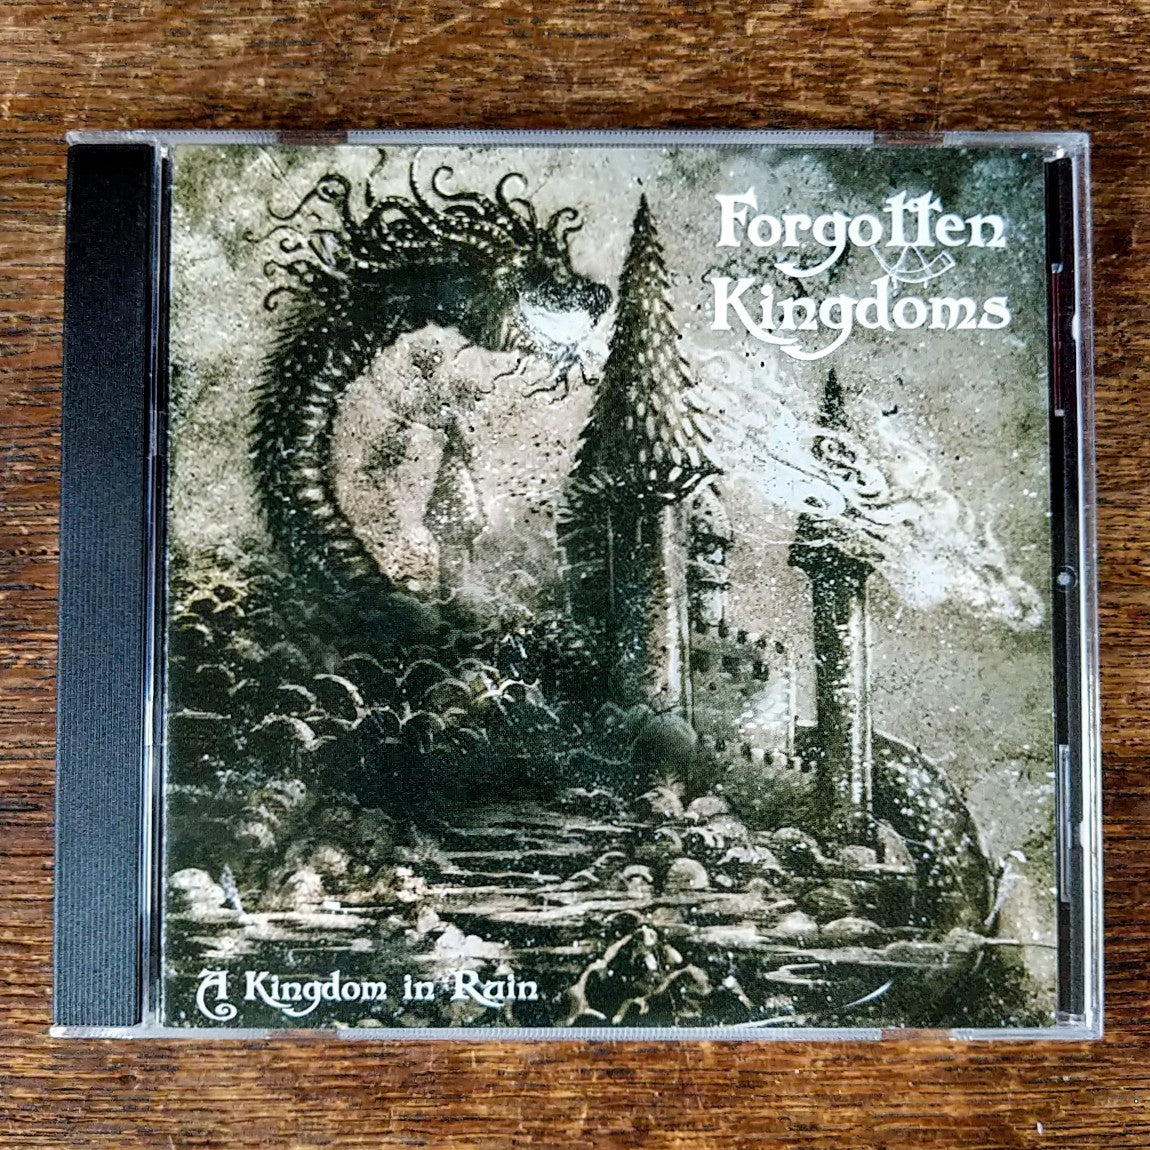 [SOLD OUT] FORGOTTEN KINGDOMS "A Kingdom in Ruin" CD